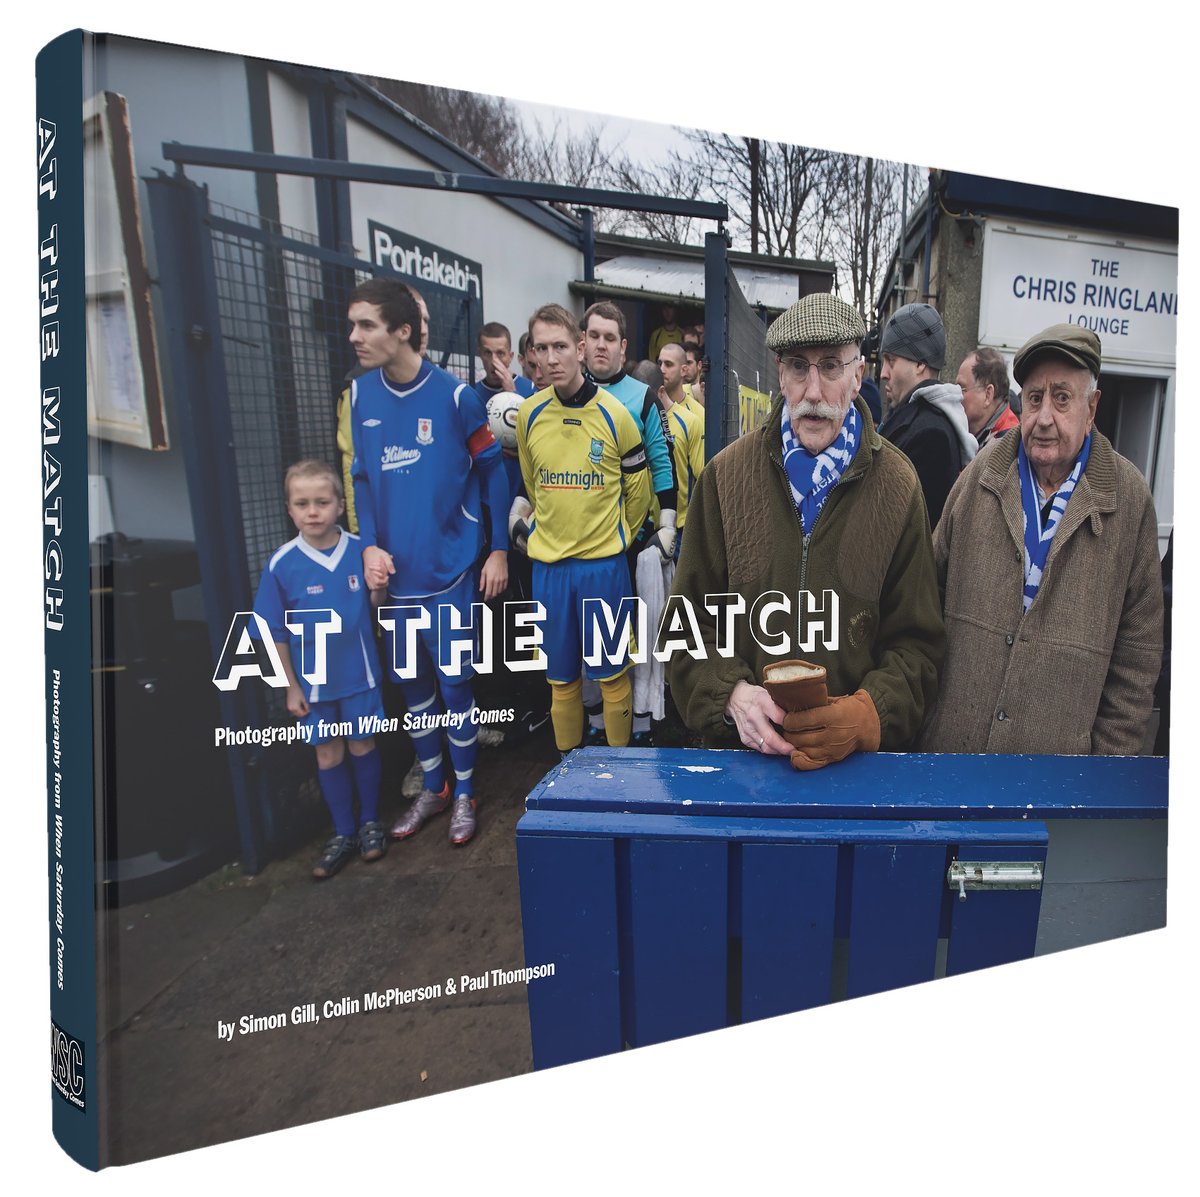 Excitement builds ahead of publication of #AtTheMatch, a collection of #football #photography from the @WSC_magazine archive by myself, @PaulWYI and @simongillphoto. This week, designer @dougcheese is off to #Italy to oversee the printing. Pre-order: wsc.co.uk/shop/at-the-ma…